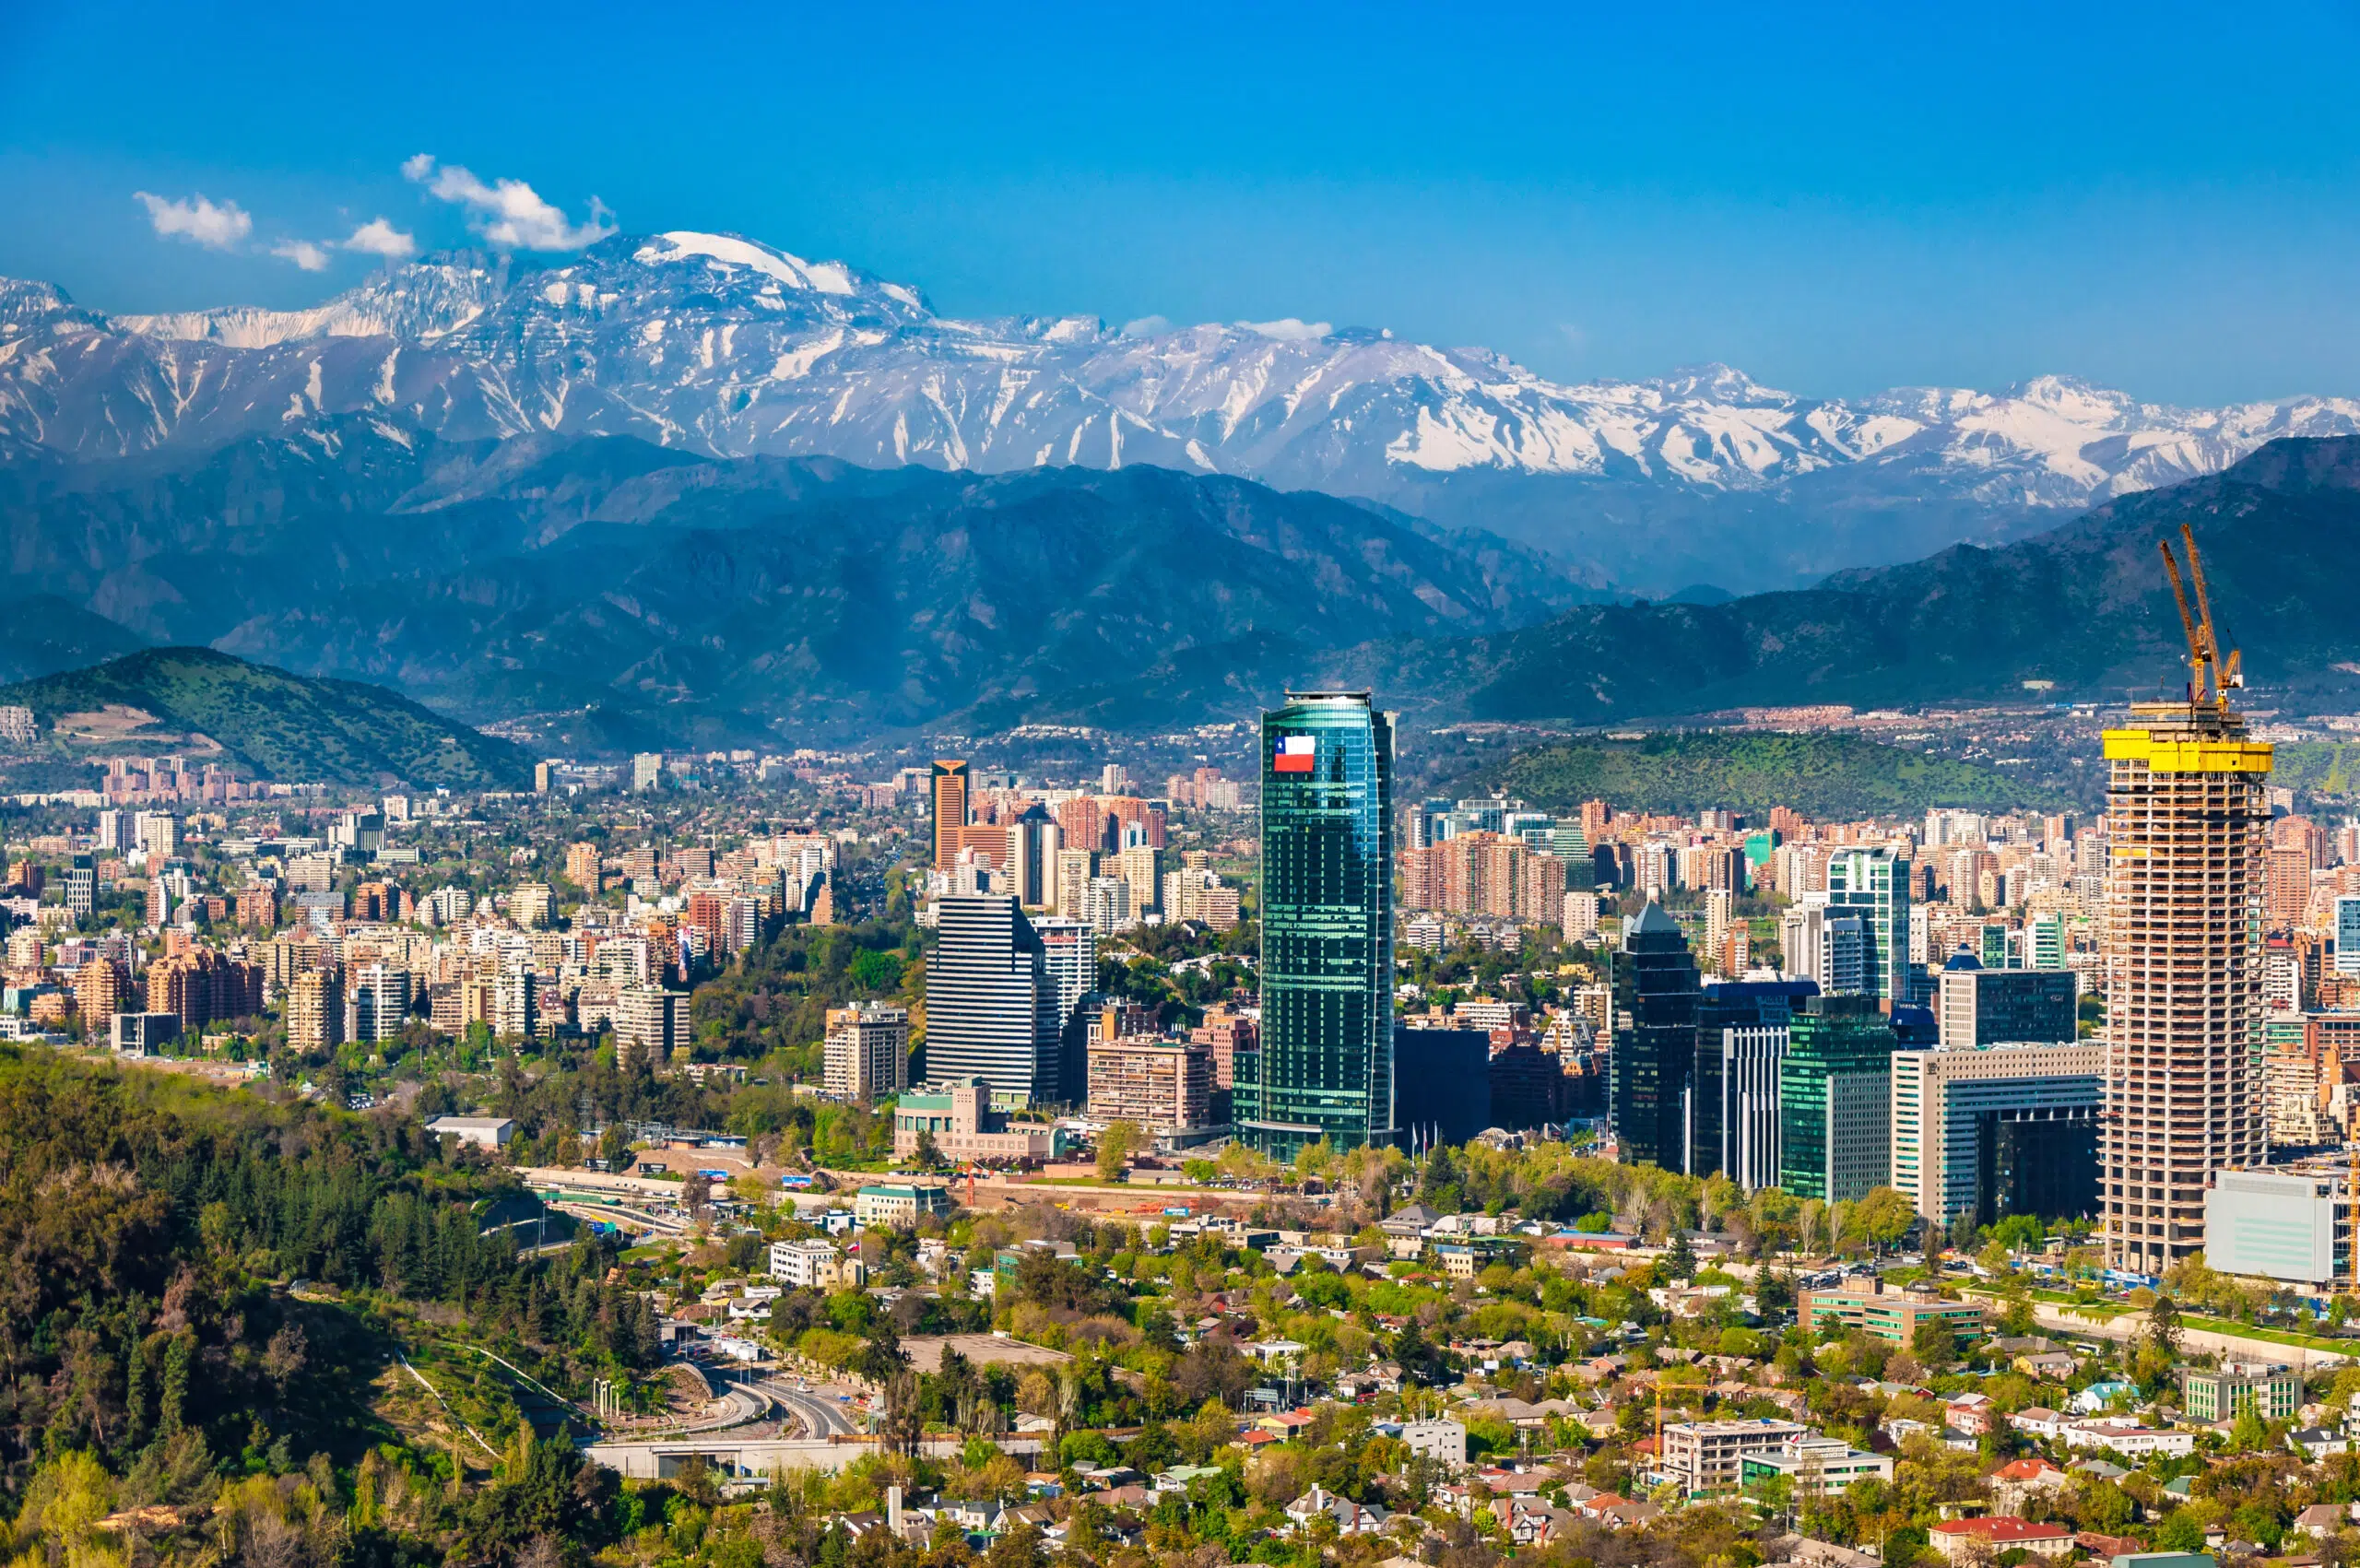 Aerial view of chile's capital with Manquehue in the background on a clear day in Santiago of Chile